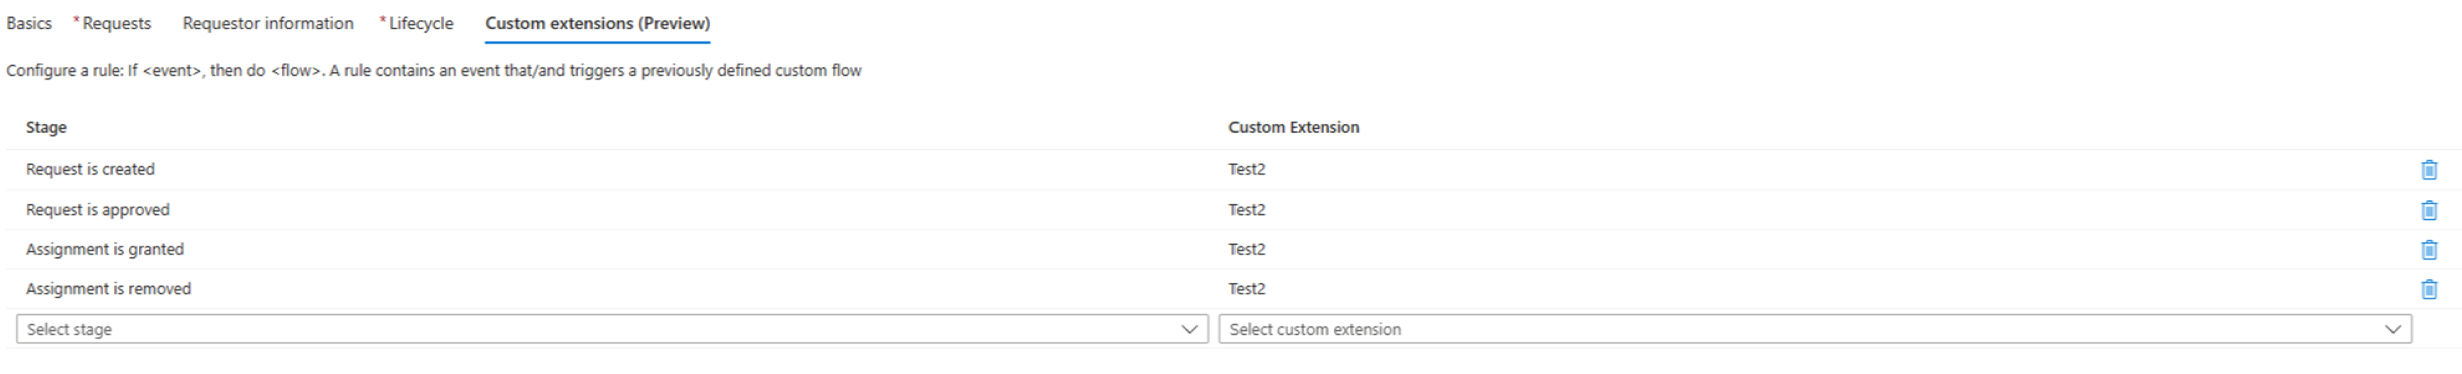 Screenshot of custom extension policies for an access package.